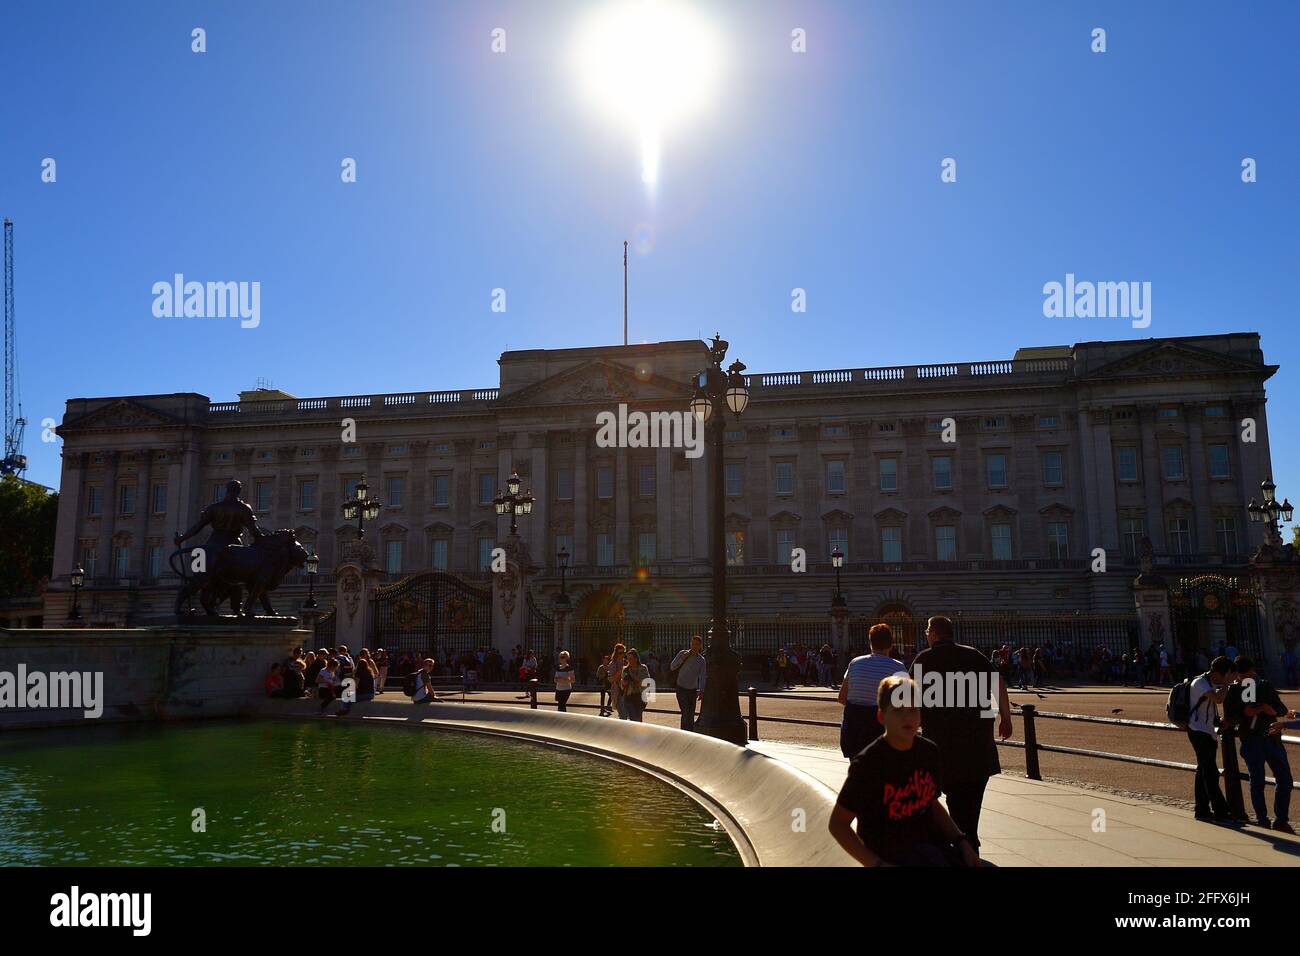 London, England, United Kingdom. Buckingham Palace, the famous residence of the monarch of the UK. The location is a major tourist attraction. Stock Photo